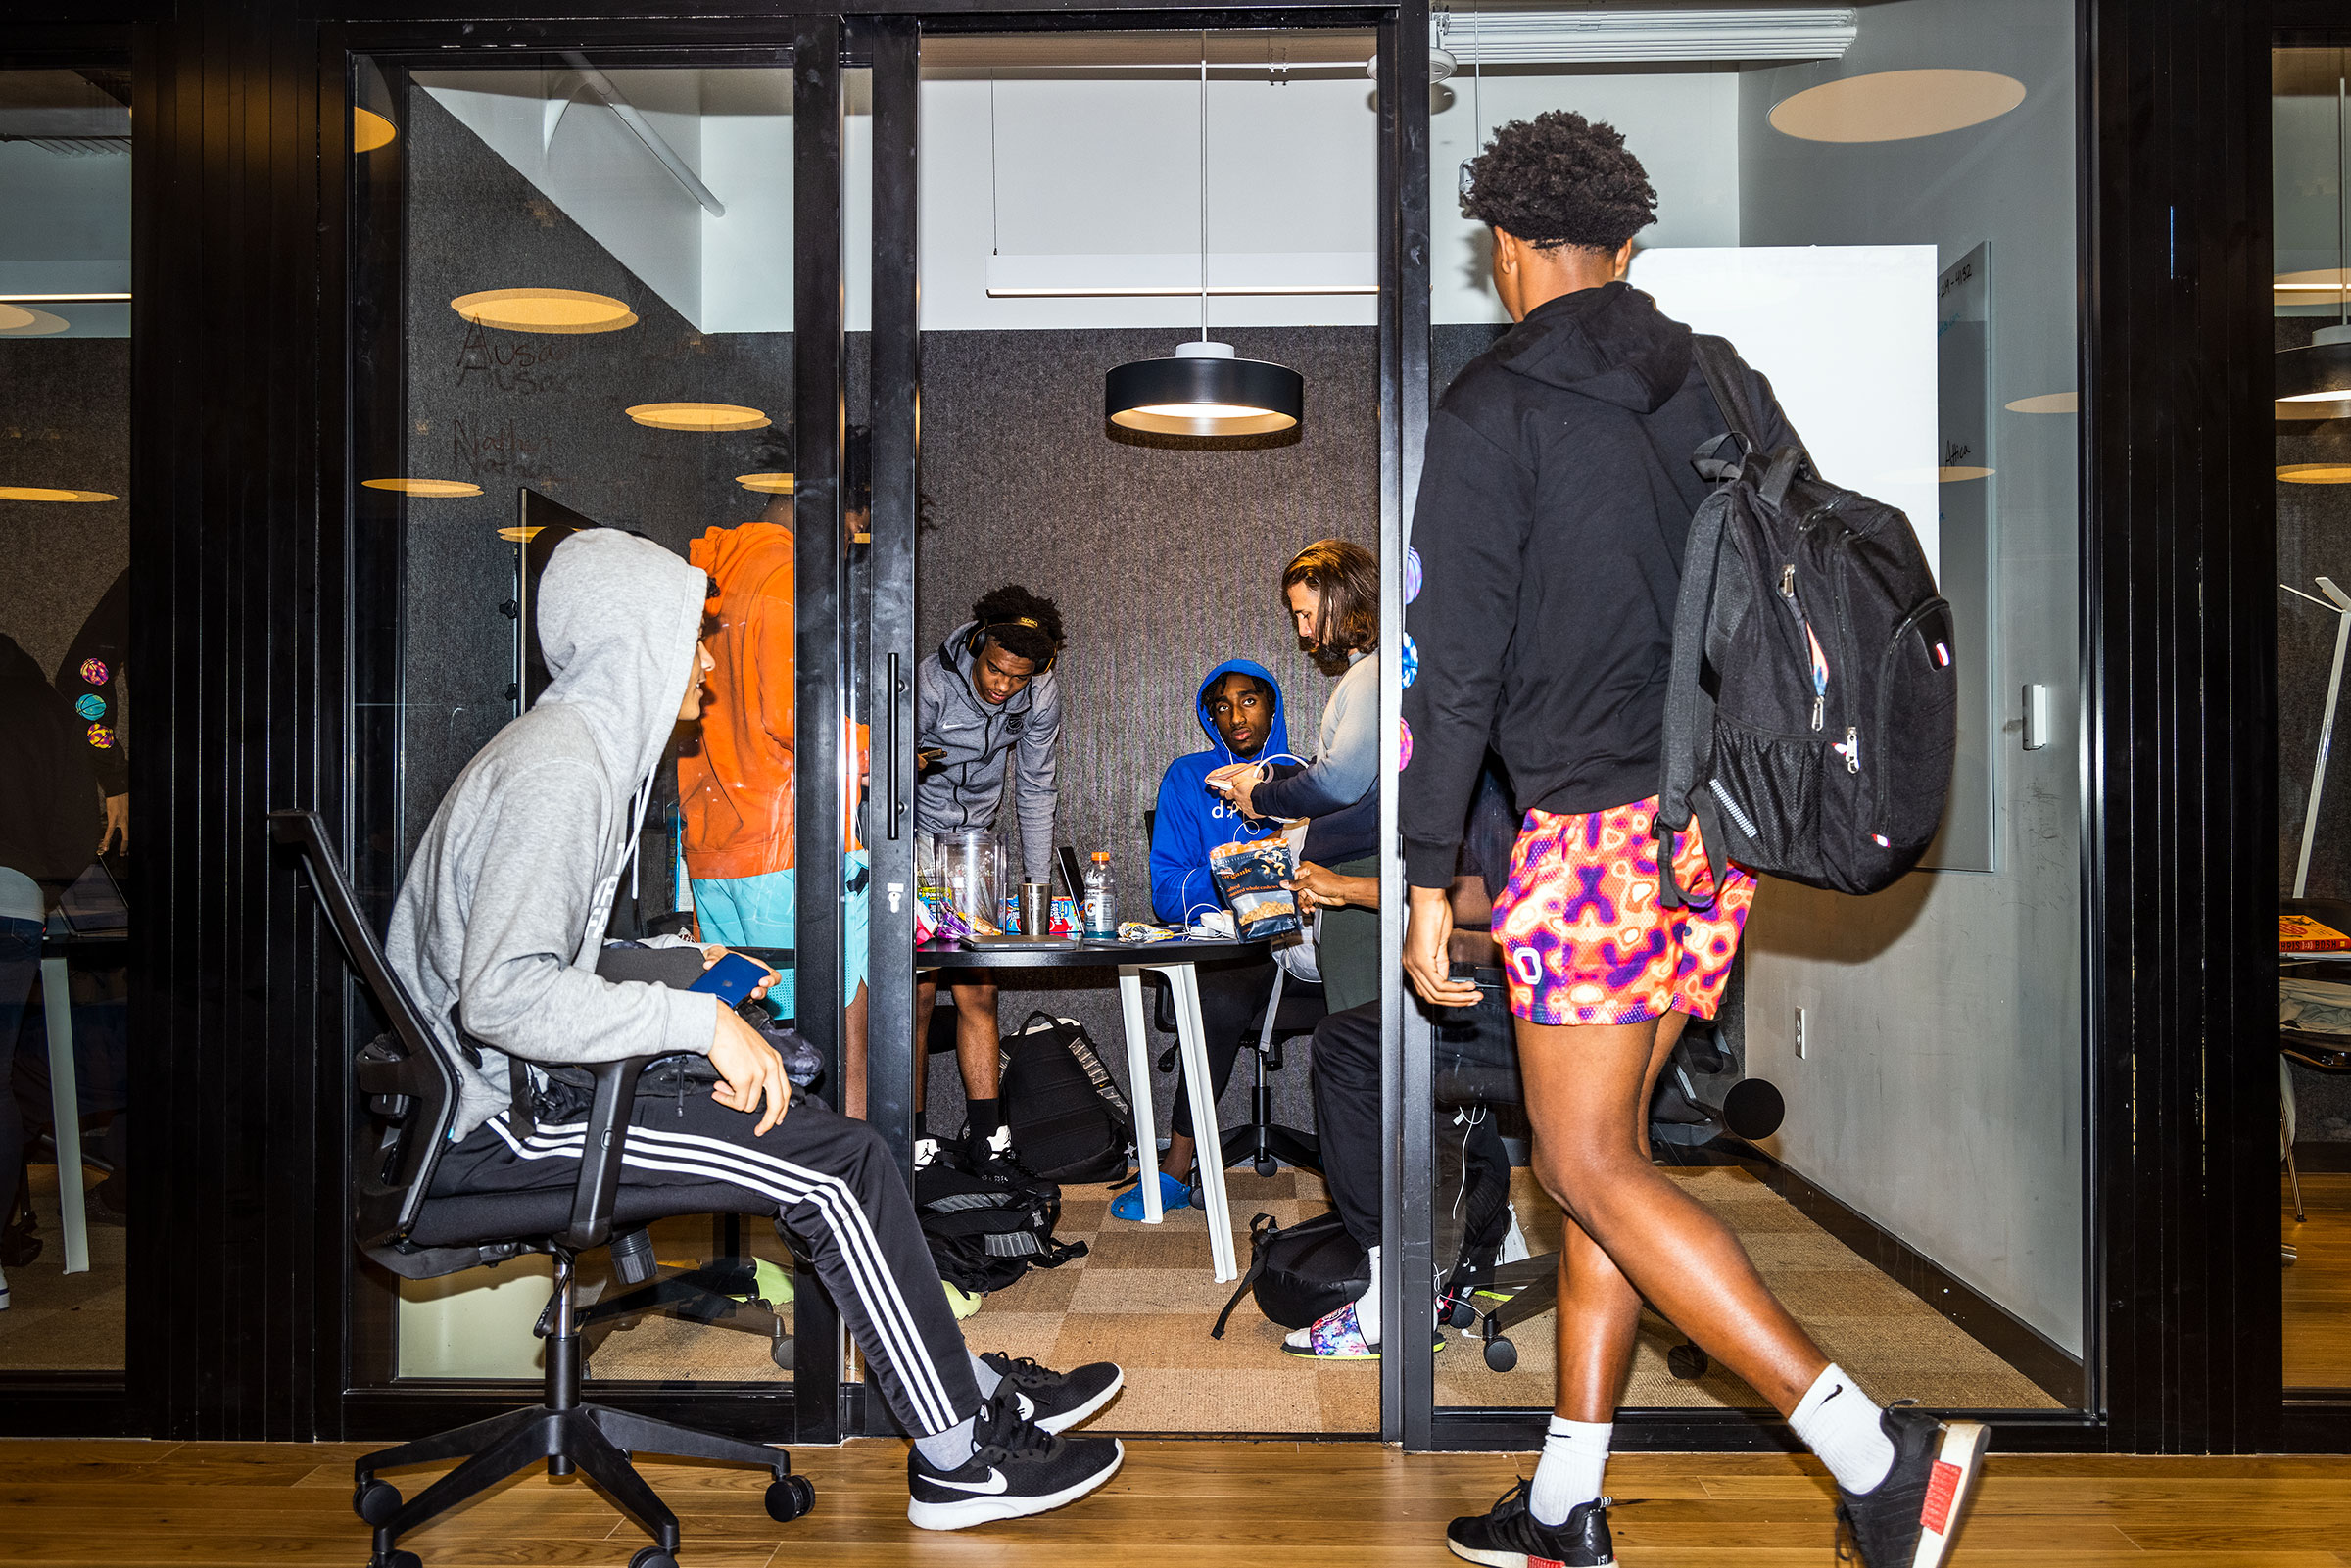 Players take classes at a WeWork space in the Buckhead neighborhood of Atlanta. (Andrew Hetherington for TIME)